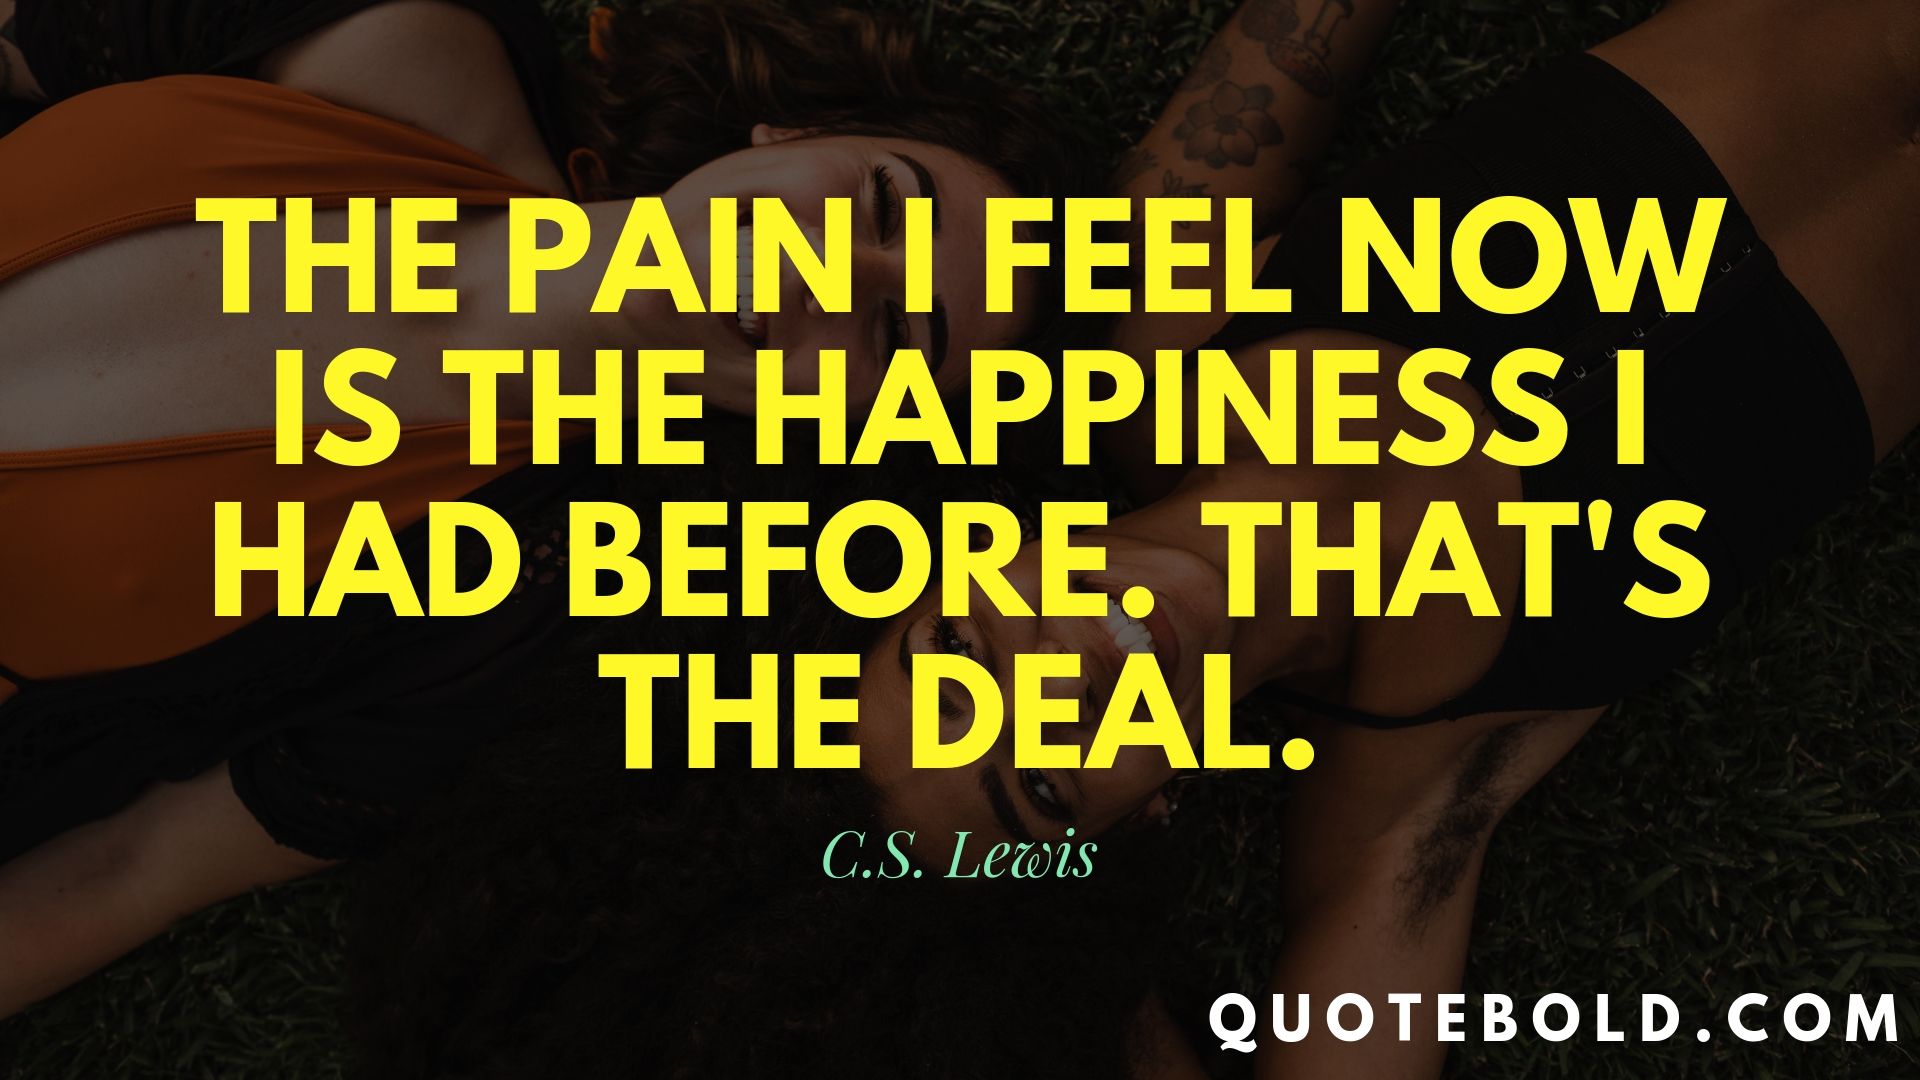 95 Short Quotes about Happiness to Make You Smile - QuoteBold